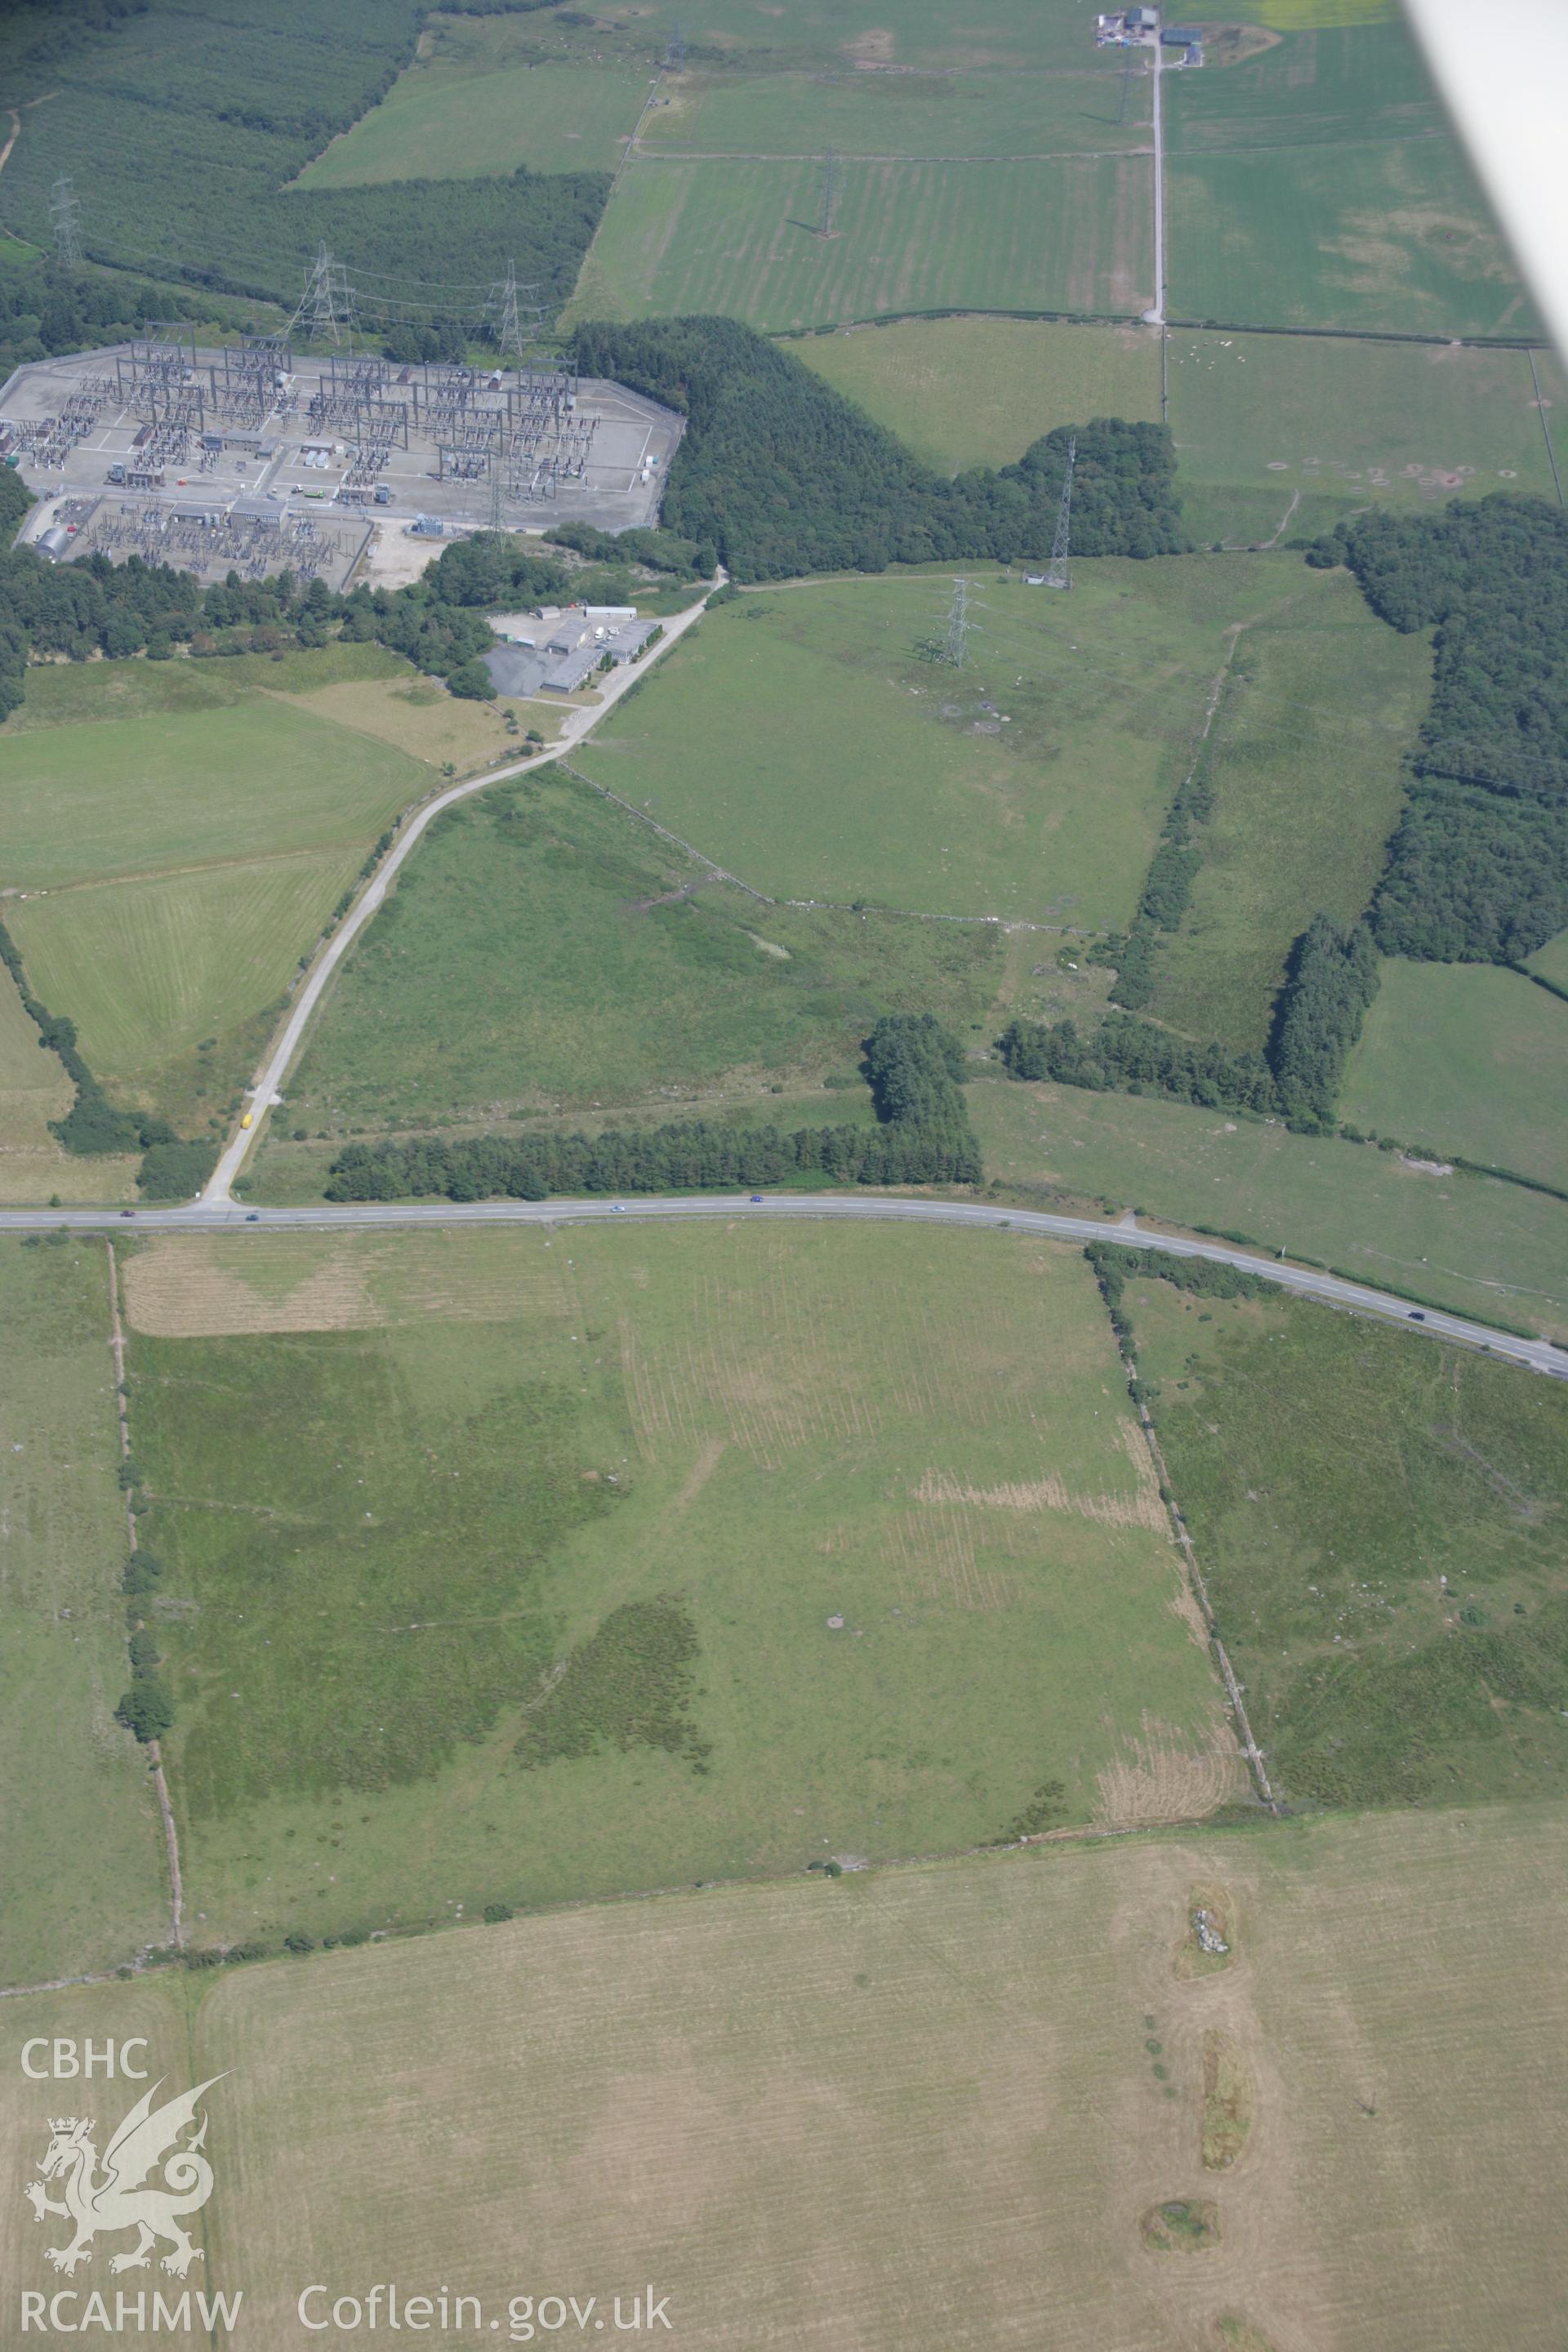 RCAHMW colour oblique aerial photograph of sections of Roman road at Ty'n-Llwyn. Taken on 18 July 2006 by Toby Driver.